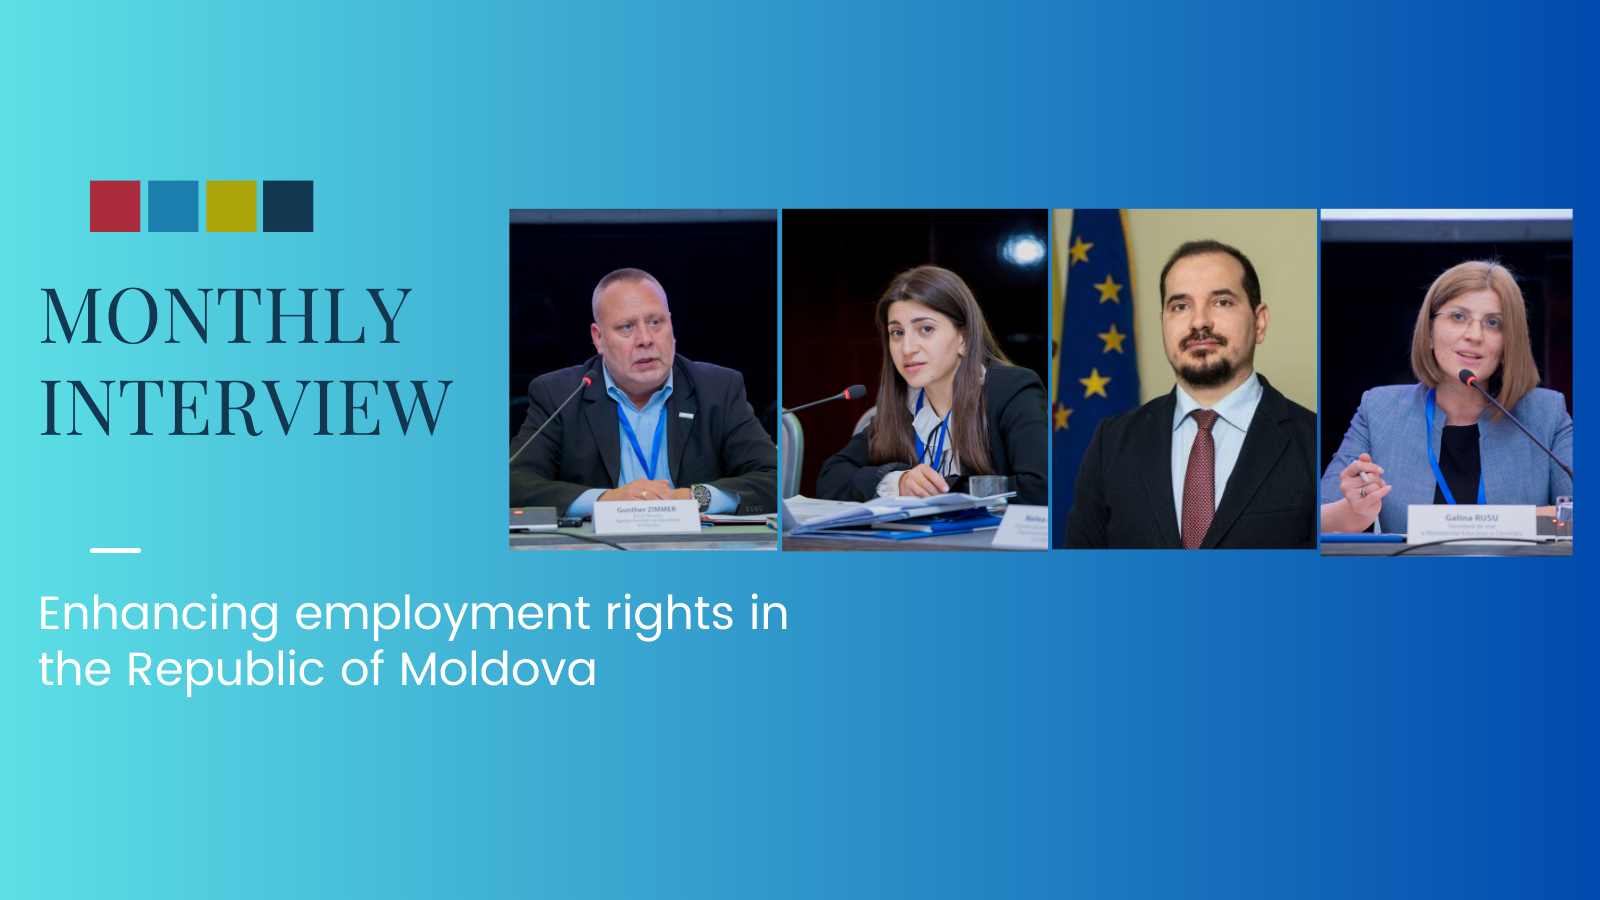 Interview: Enhancing social and employment rights of persons from vulnerable groups in the Republic of Moldova